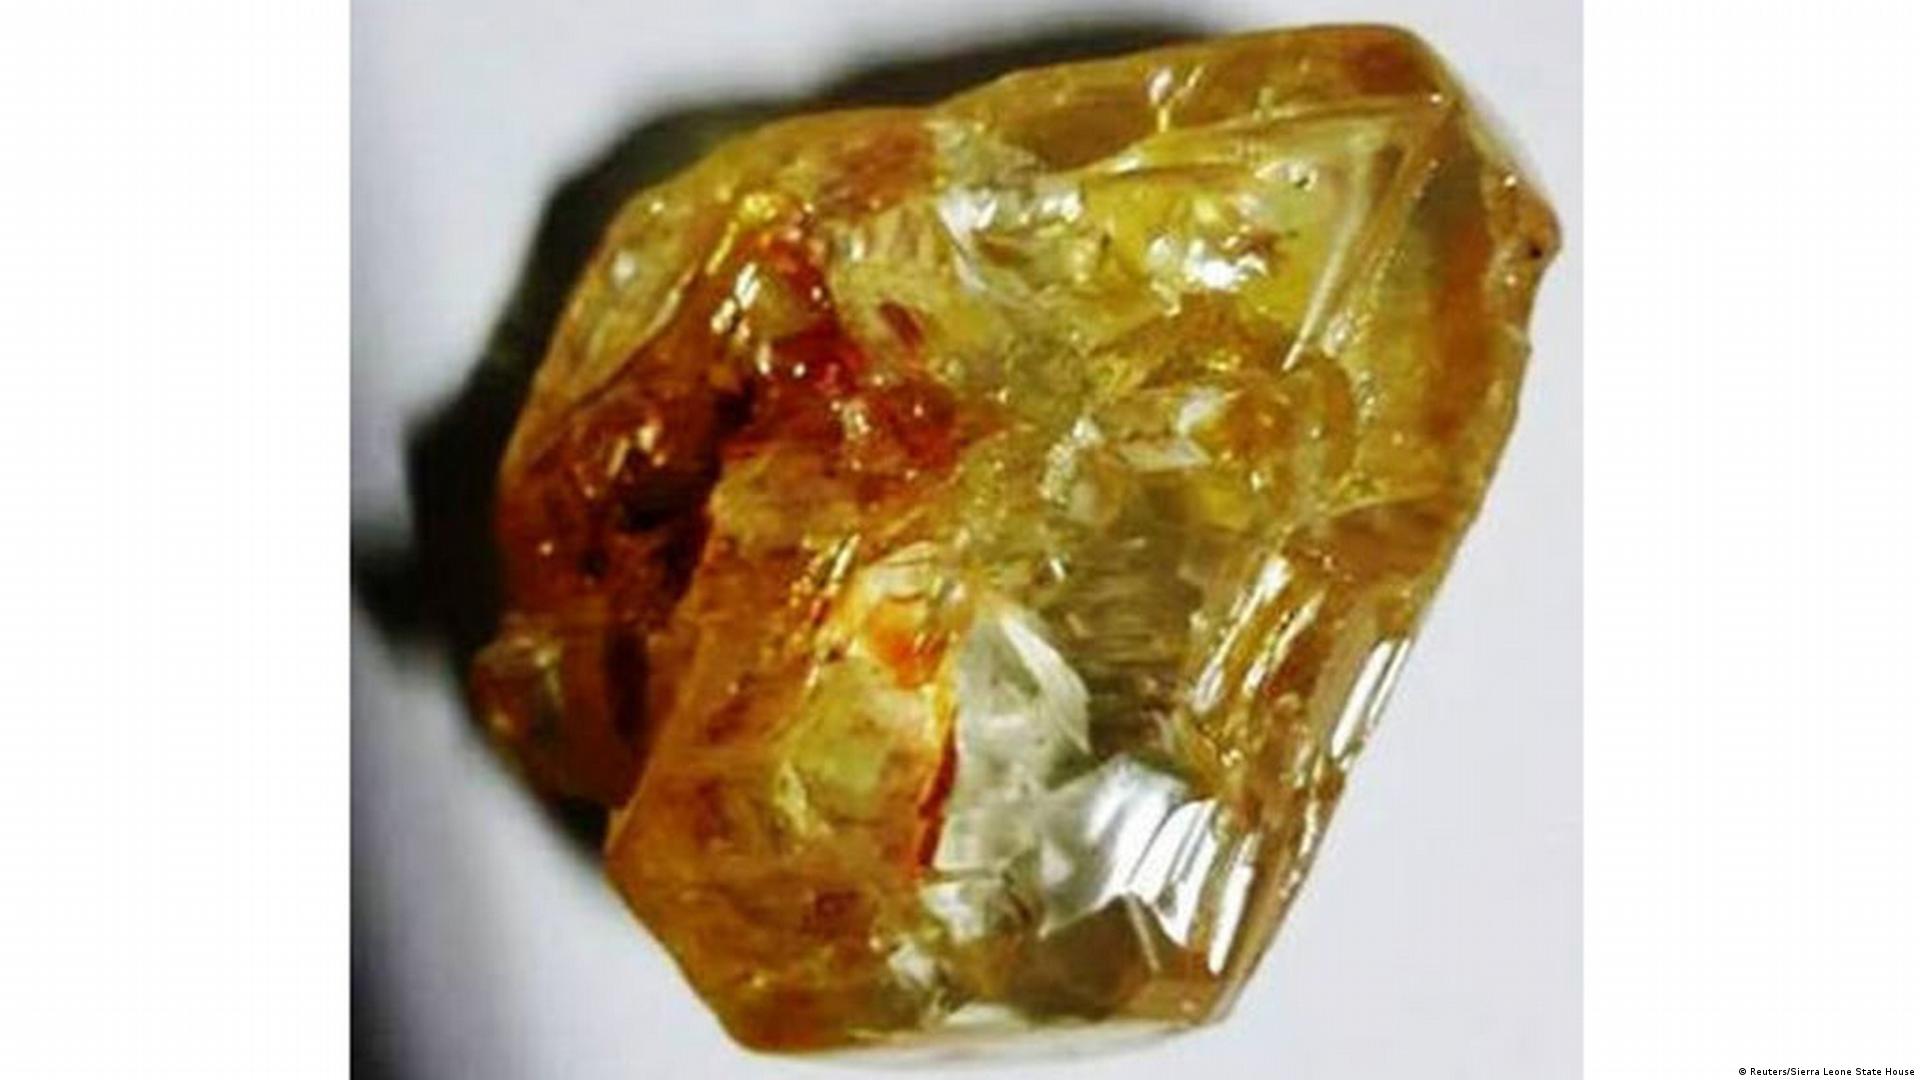 Two Large Rough Diamonds Found in Lesotho